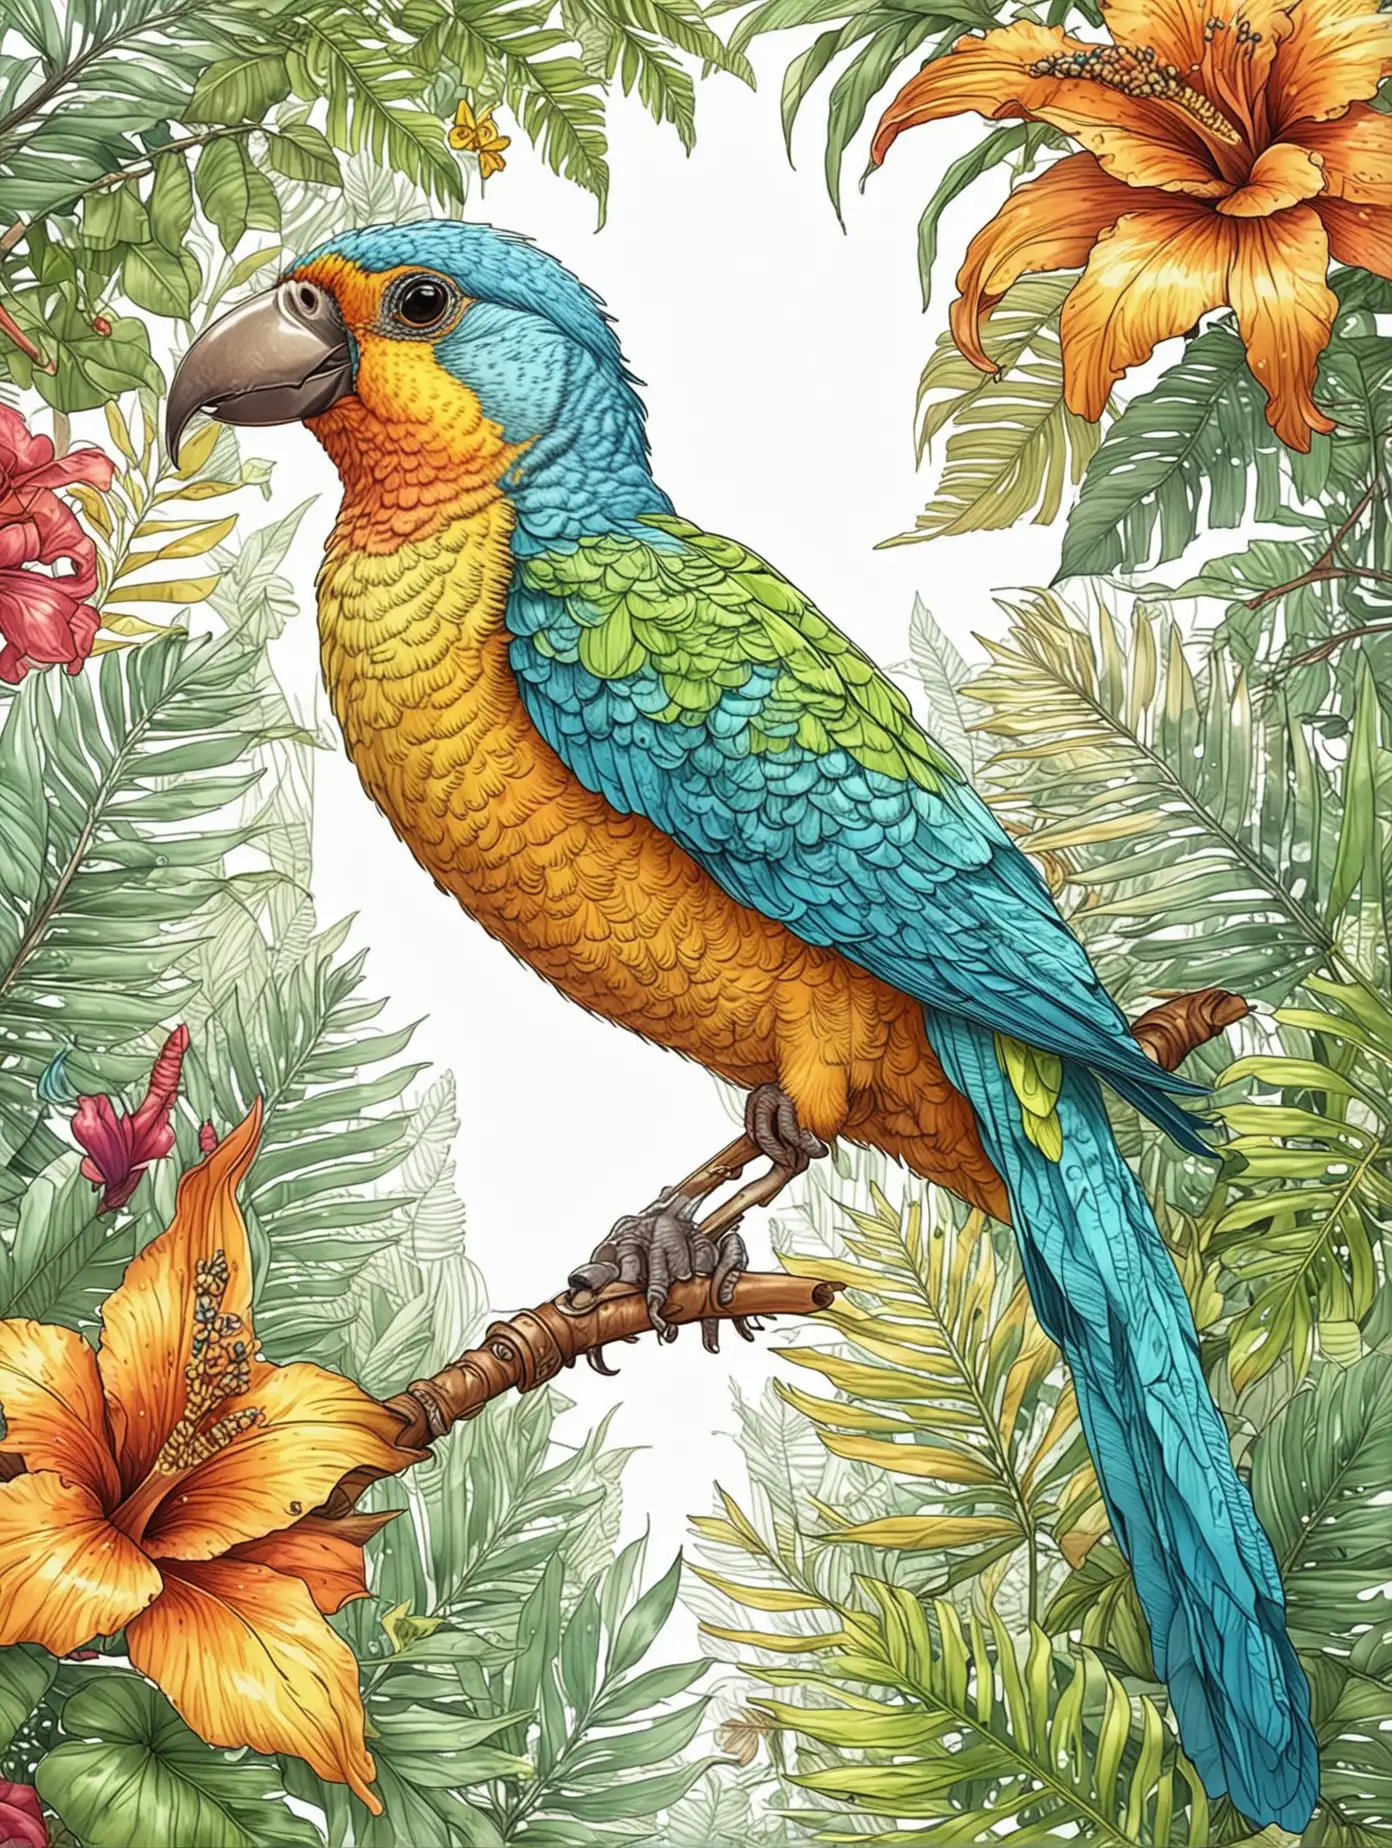 Adult Coloring Page Tropical Birds in Cartoon Style with High Detail and Dynamic Colors